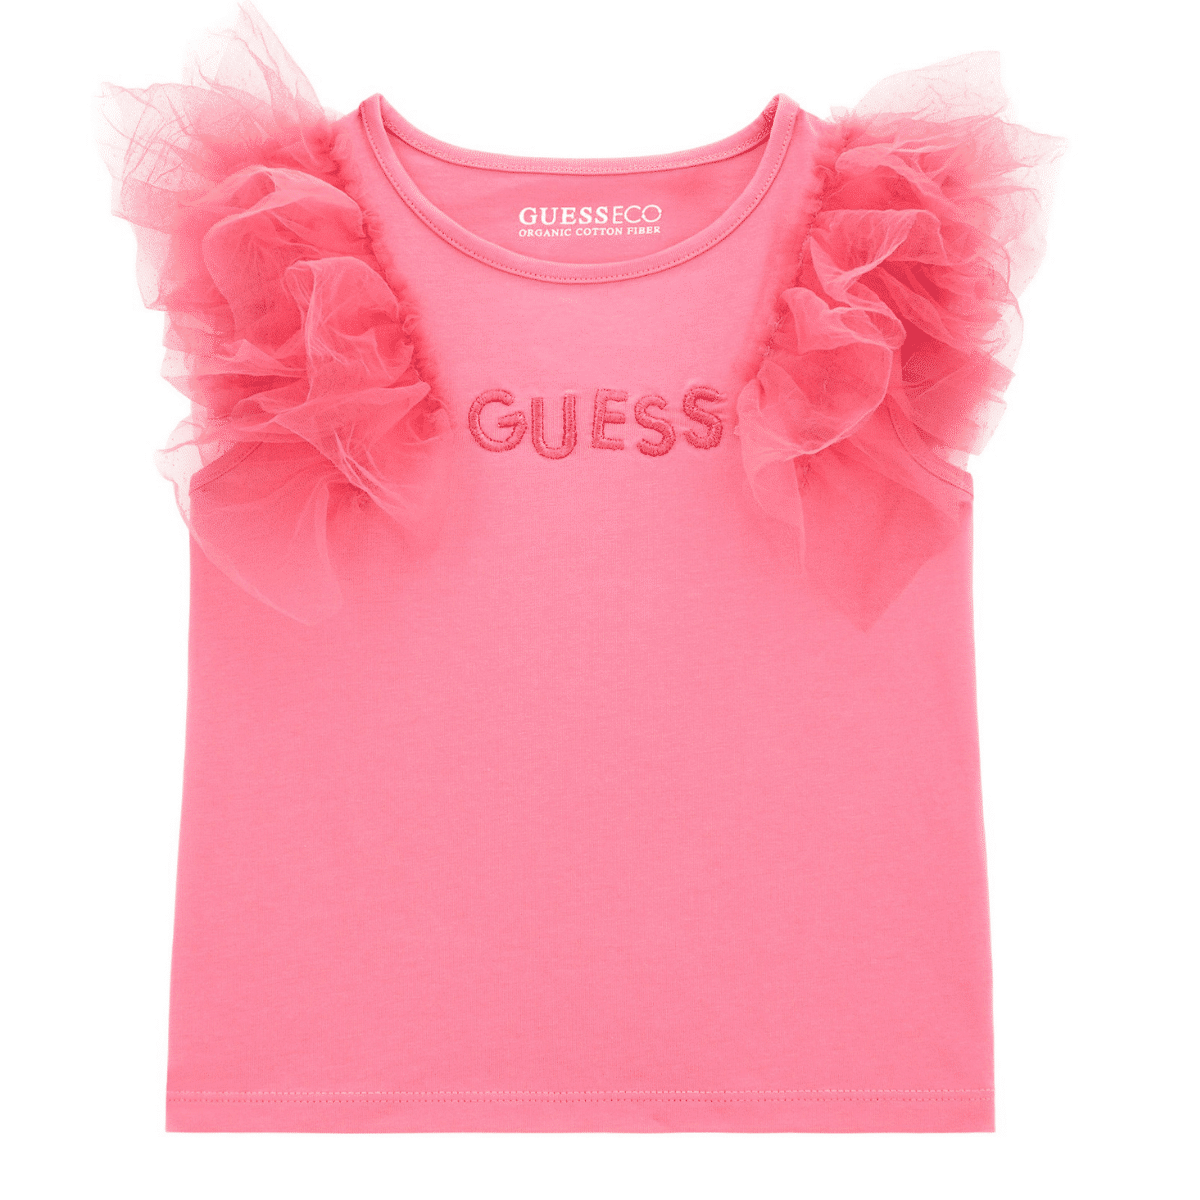 guess girls pink shirt with frilly sleeves